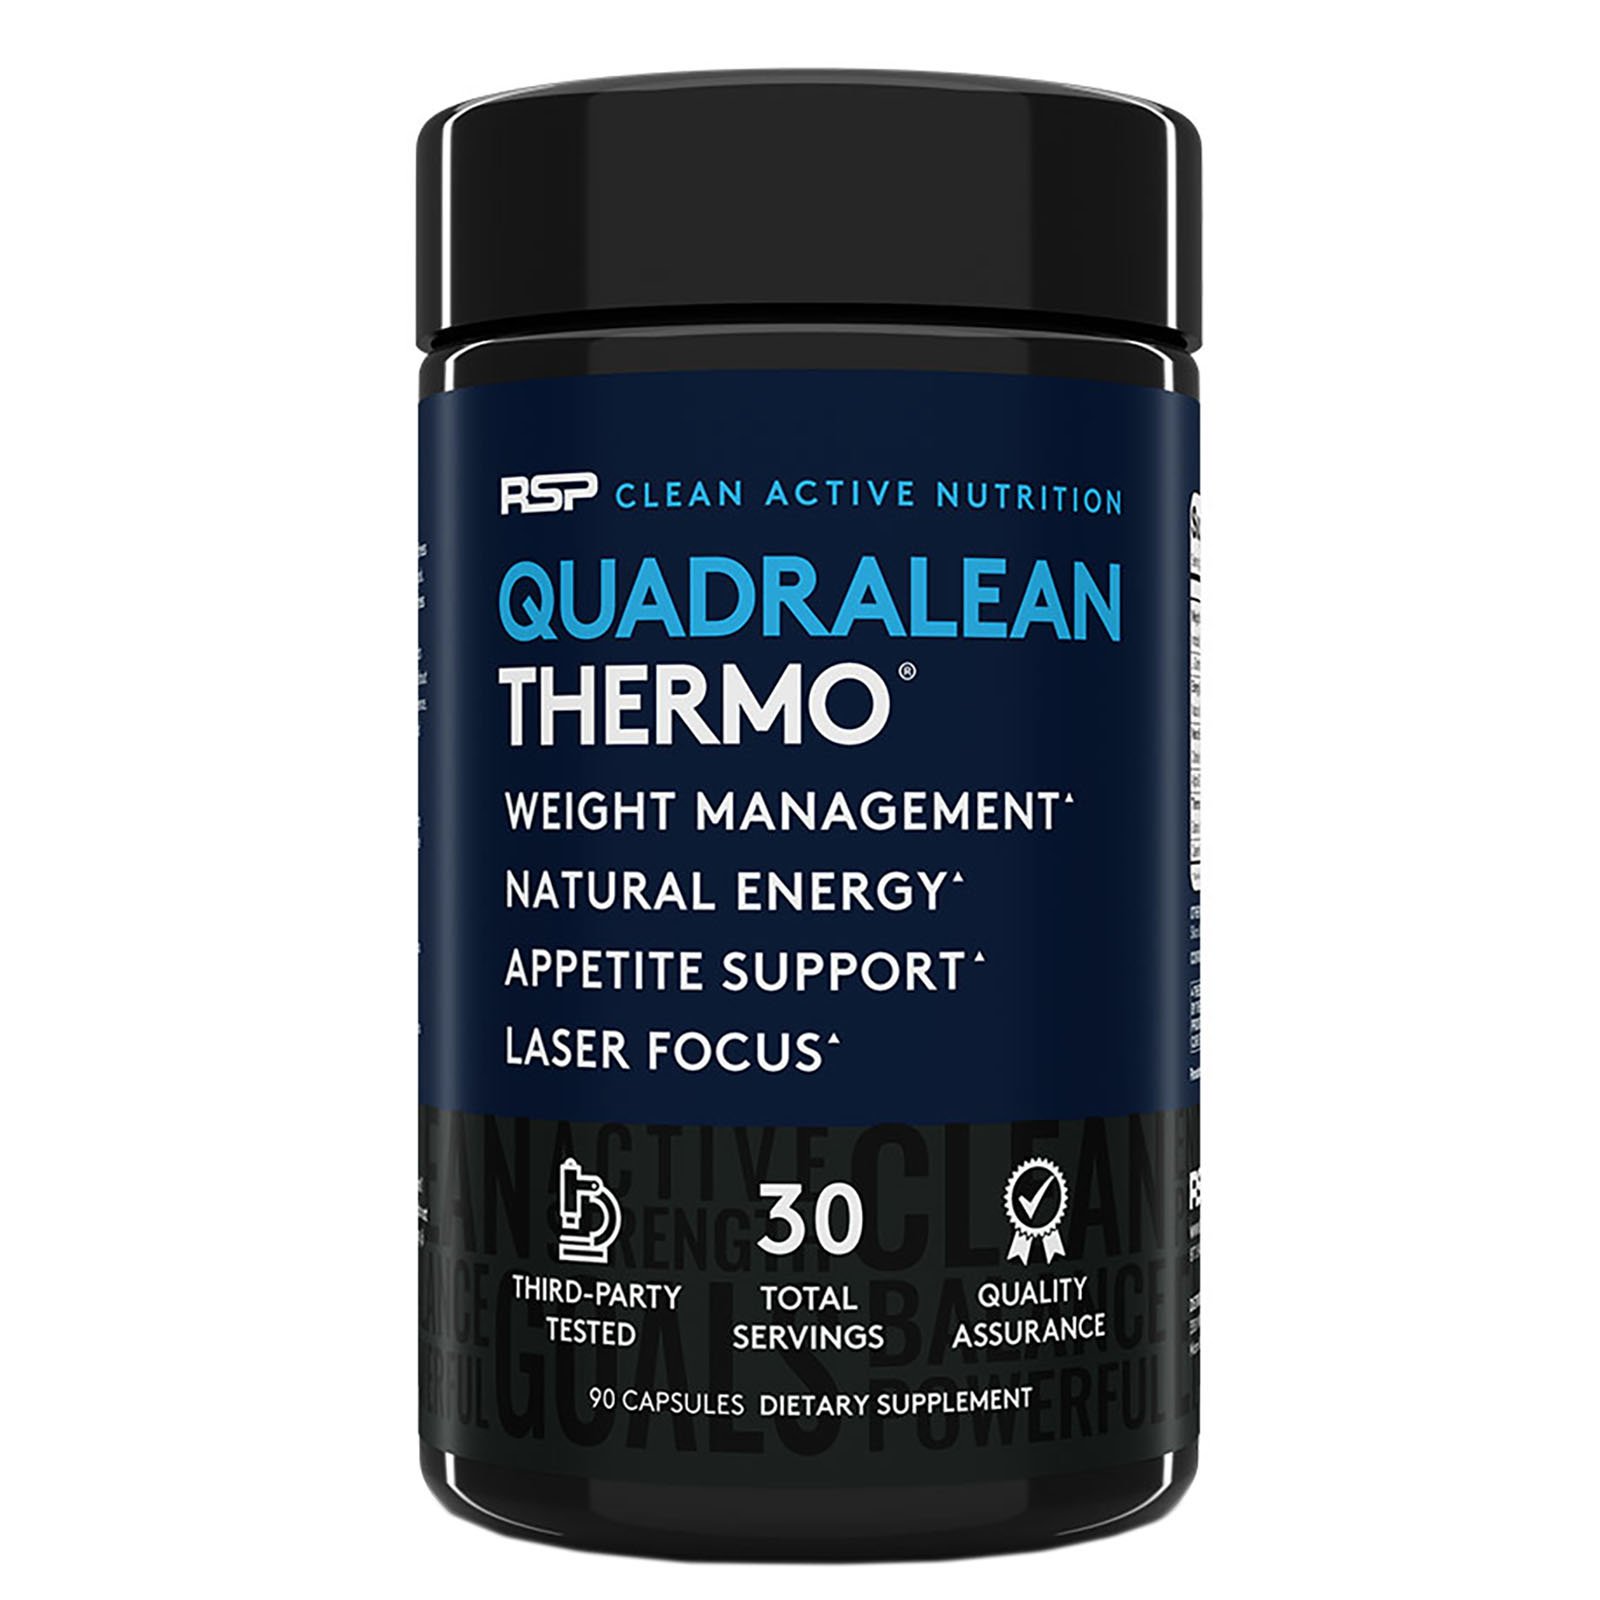 thermo blend fat burner review